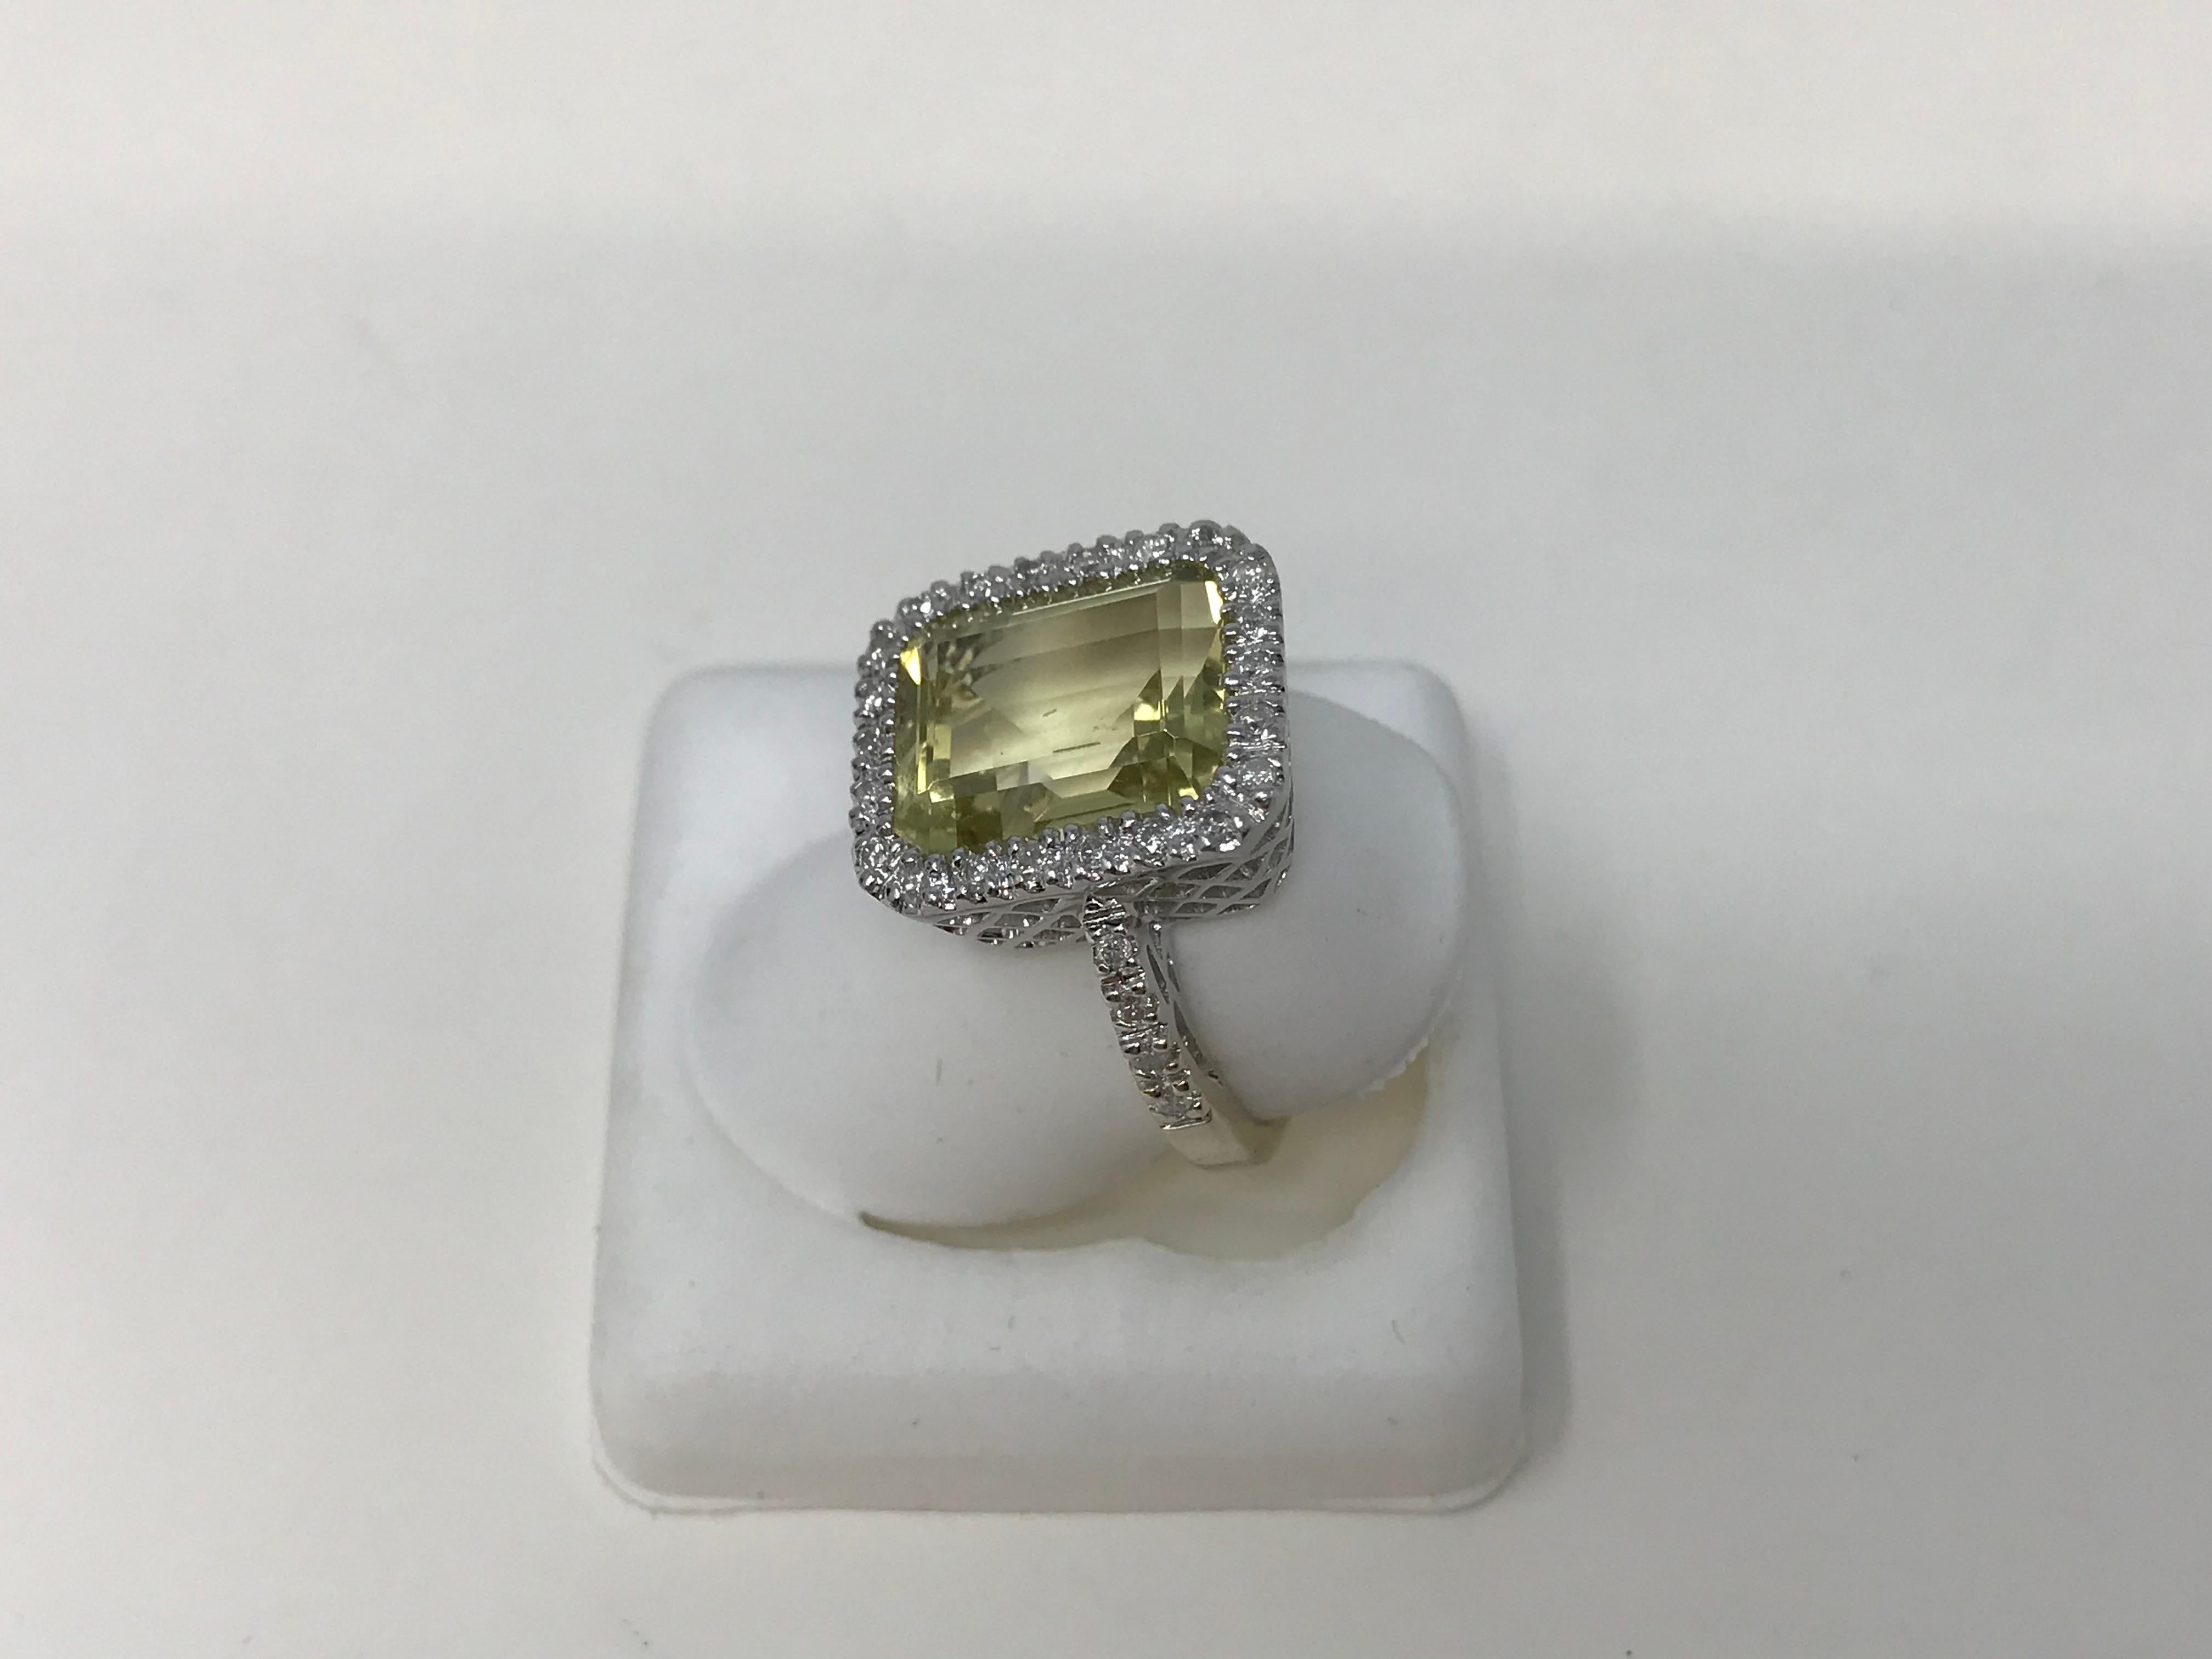 14k white gold ladies ring set with lemon quartz, emerald cut, 12 x 10 mm and 30 diamonds of .001 ct each; purity I, clarity h-I and stamped 14k. Maker unknown, made in Canada circa 2000. With a rhodium finish and in good condition. 